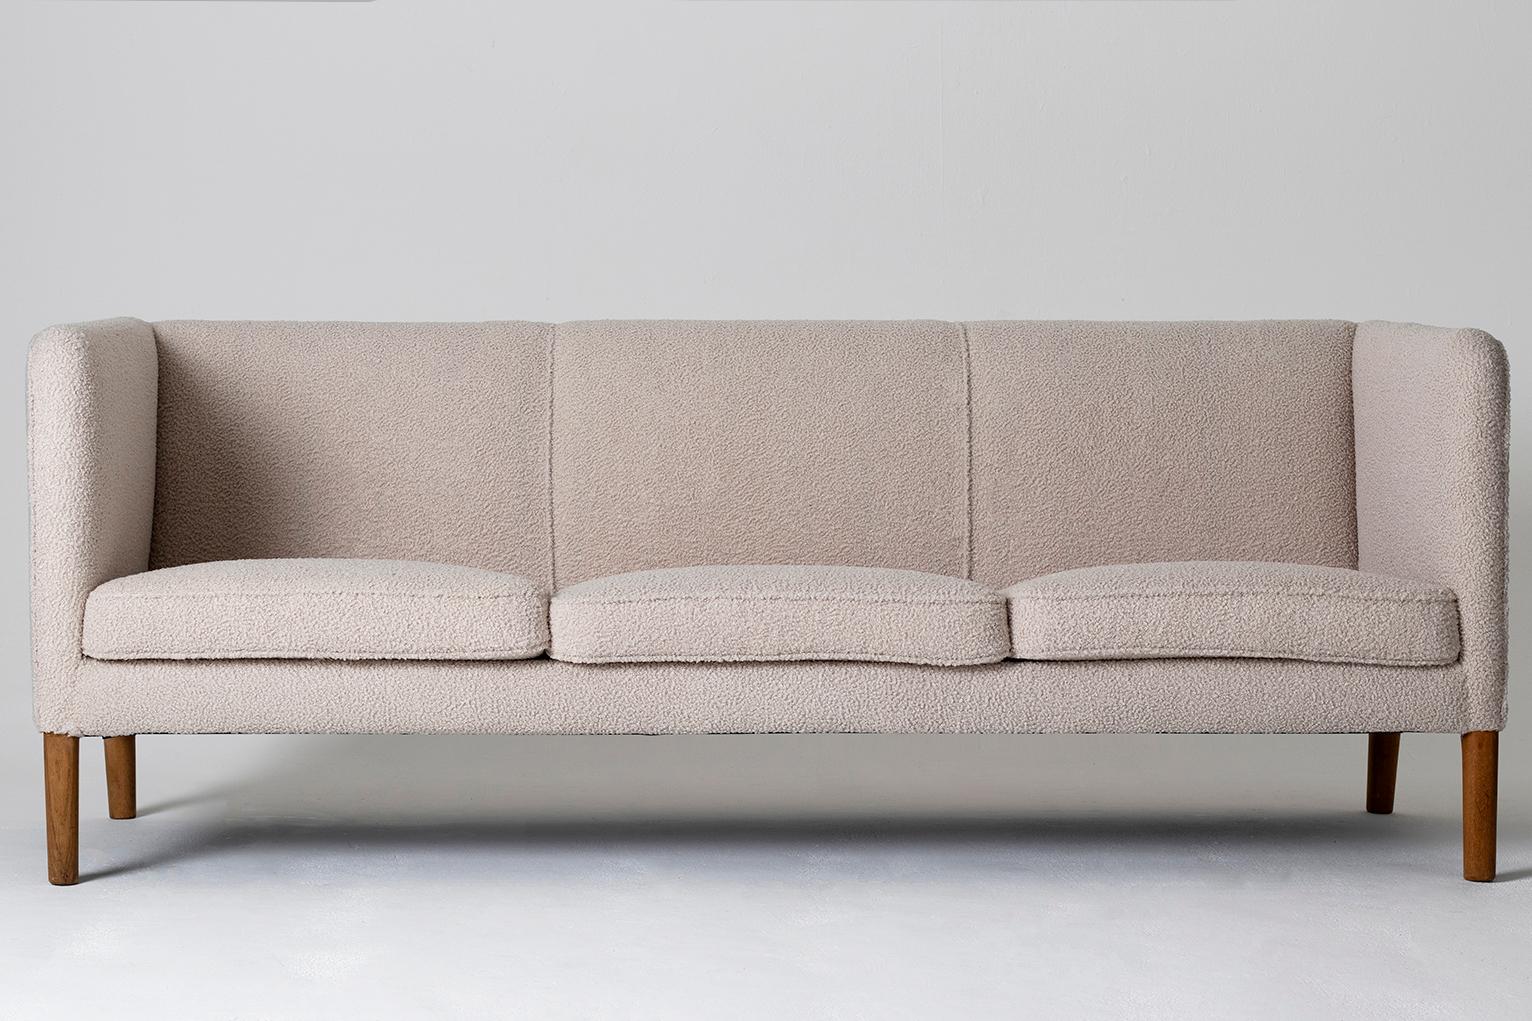 A three-seat sofa by Hans J. Wegner, (1914-2007).
Newly reupholstered in beige wool, on solid oak legs.
Manufactured by AP Stolen, model AP-18S.
Denmark, 1950s.